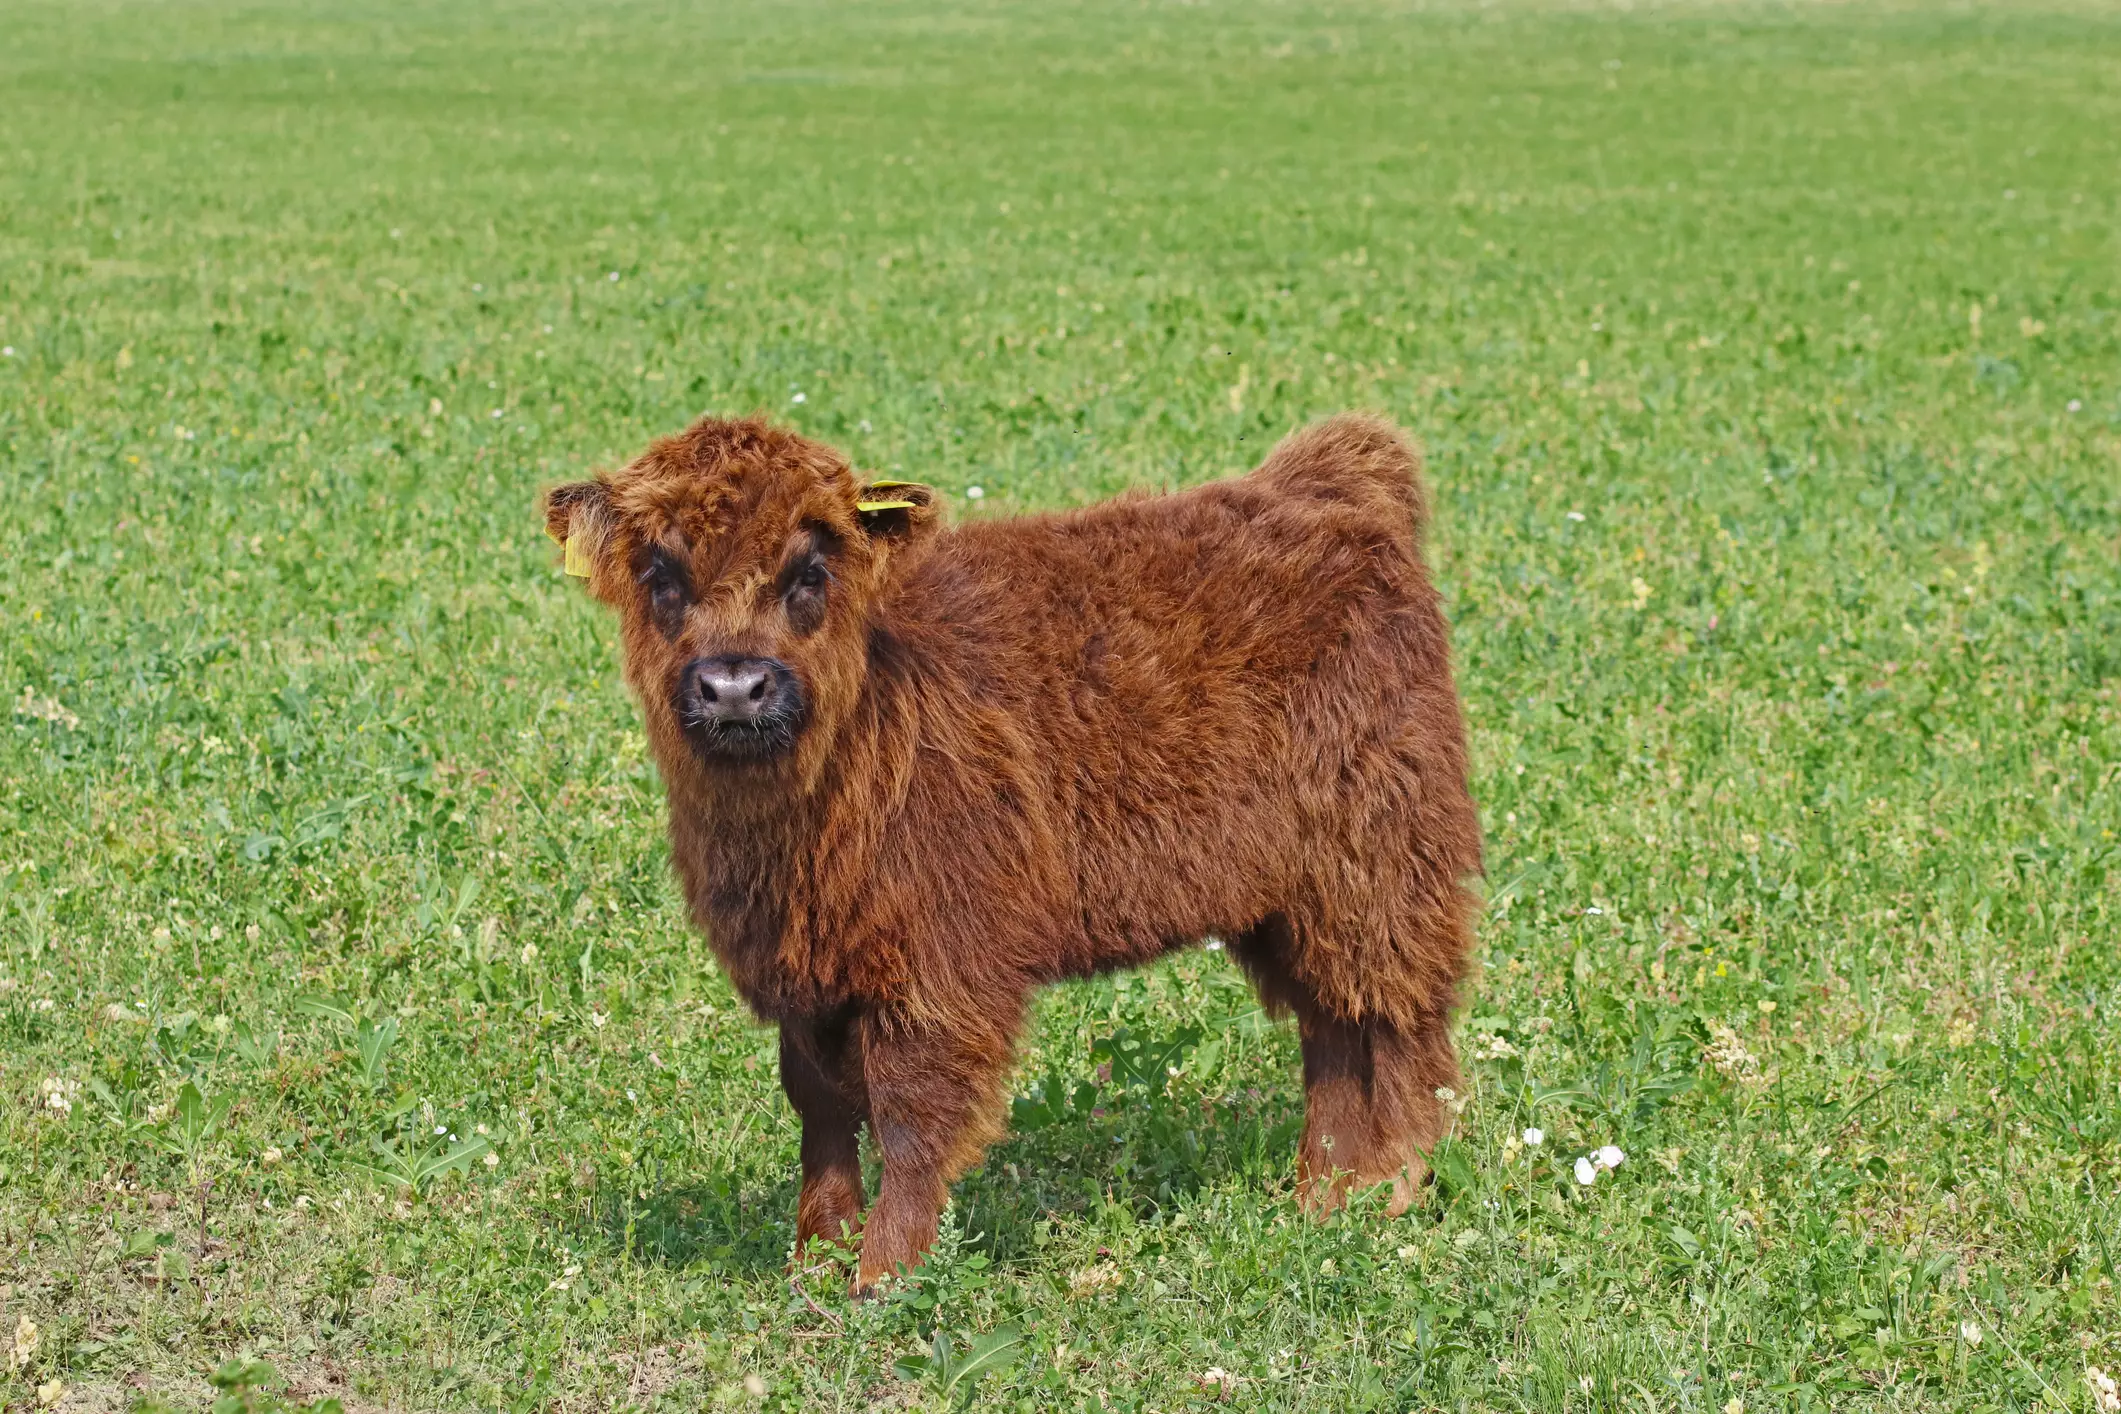 How Much Does A Mini Highland Cow Cost - How much mooola do highlands